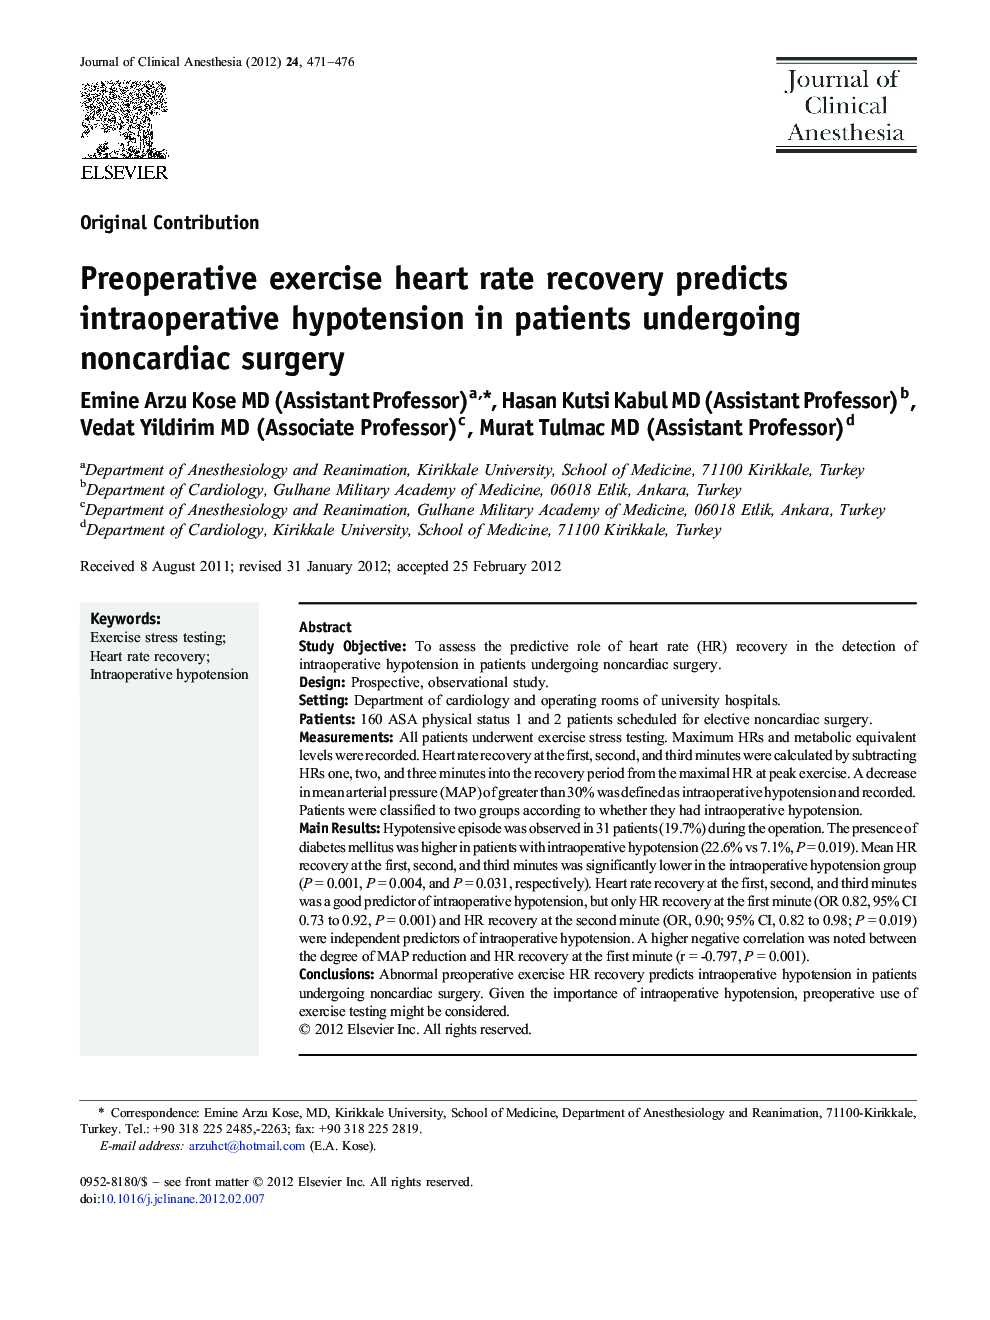 Preoperative exercise heart rate recovery predicts intraoperative hypotension in patients undergoing noncardiac surgery